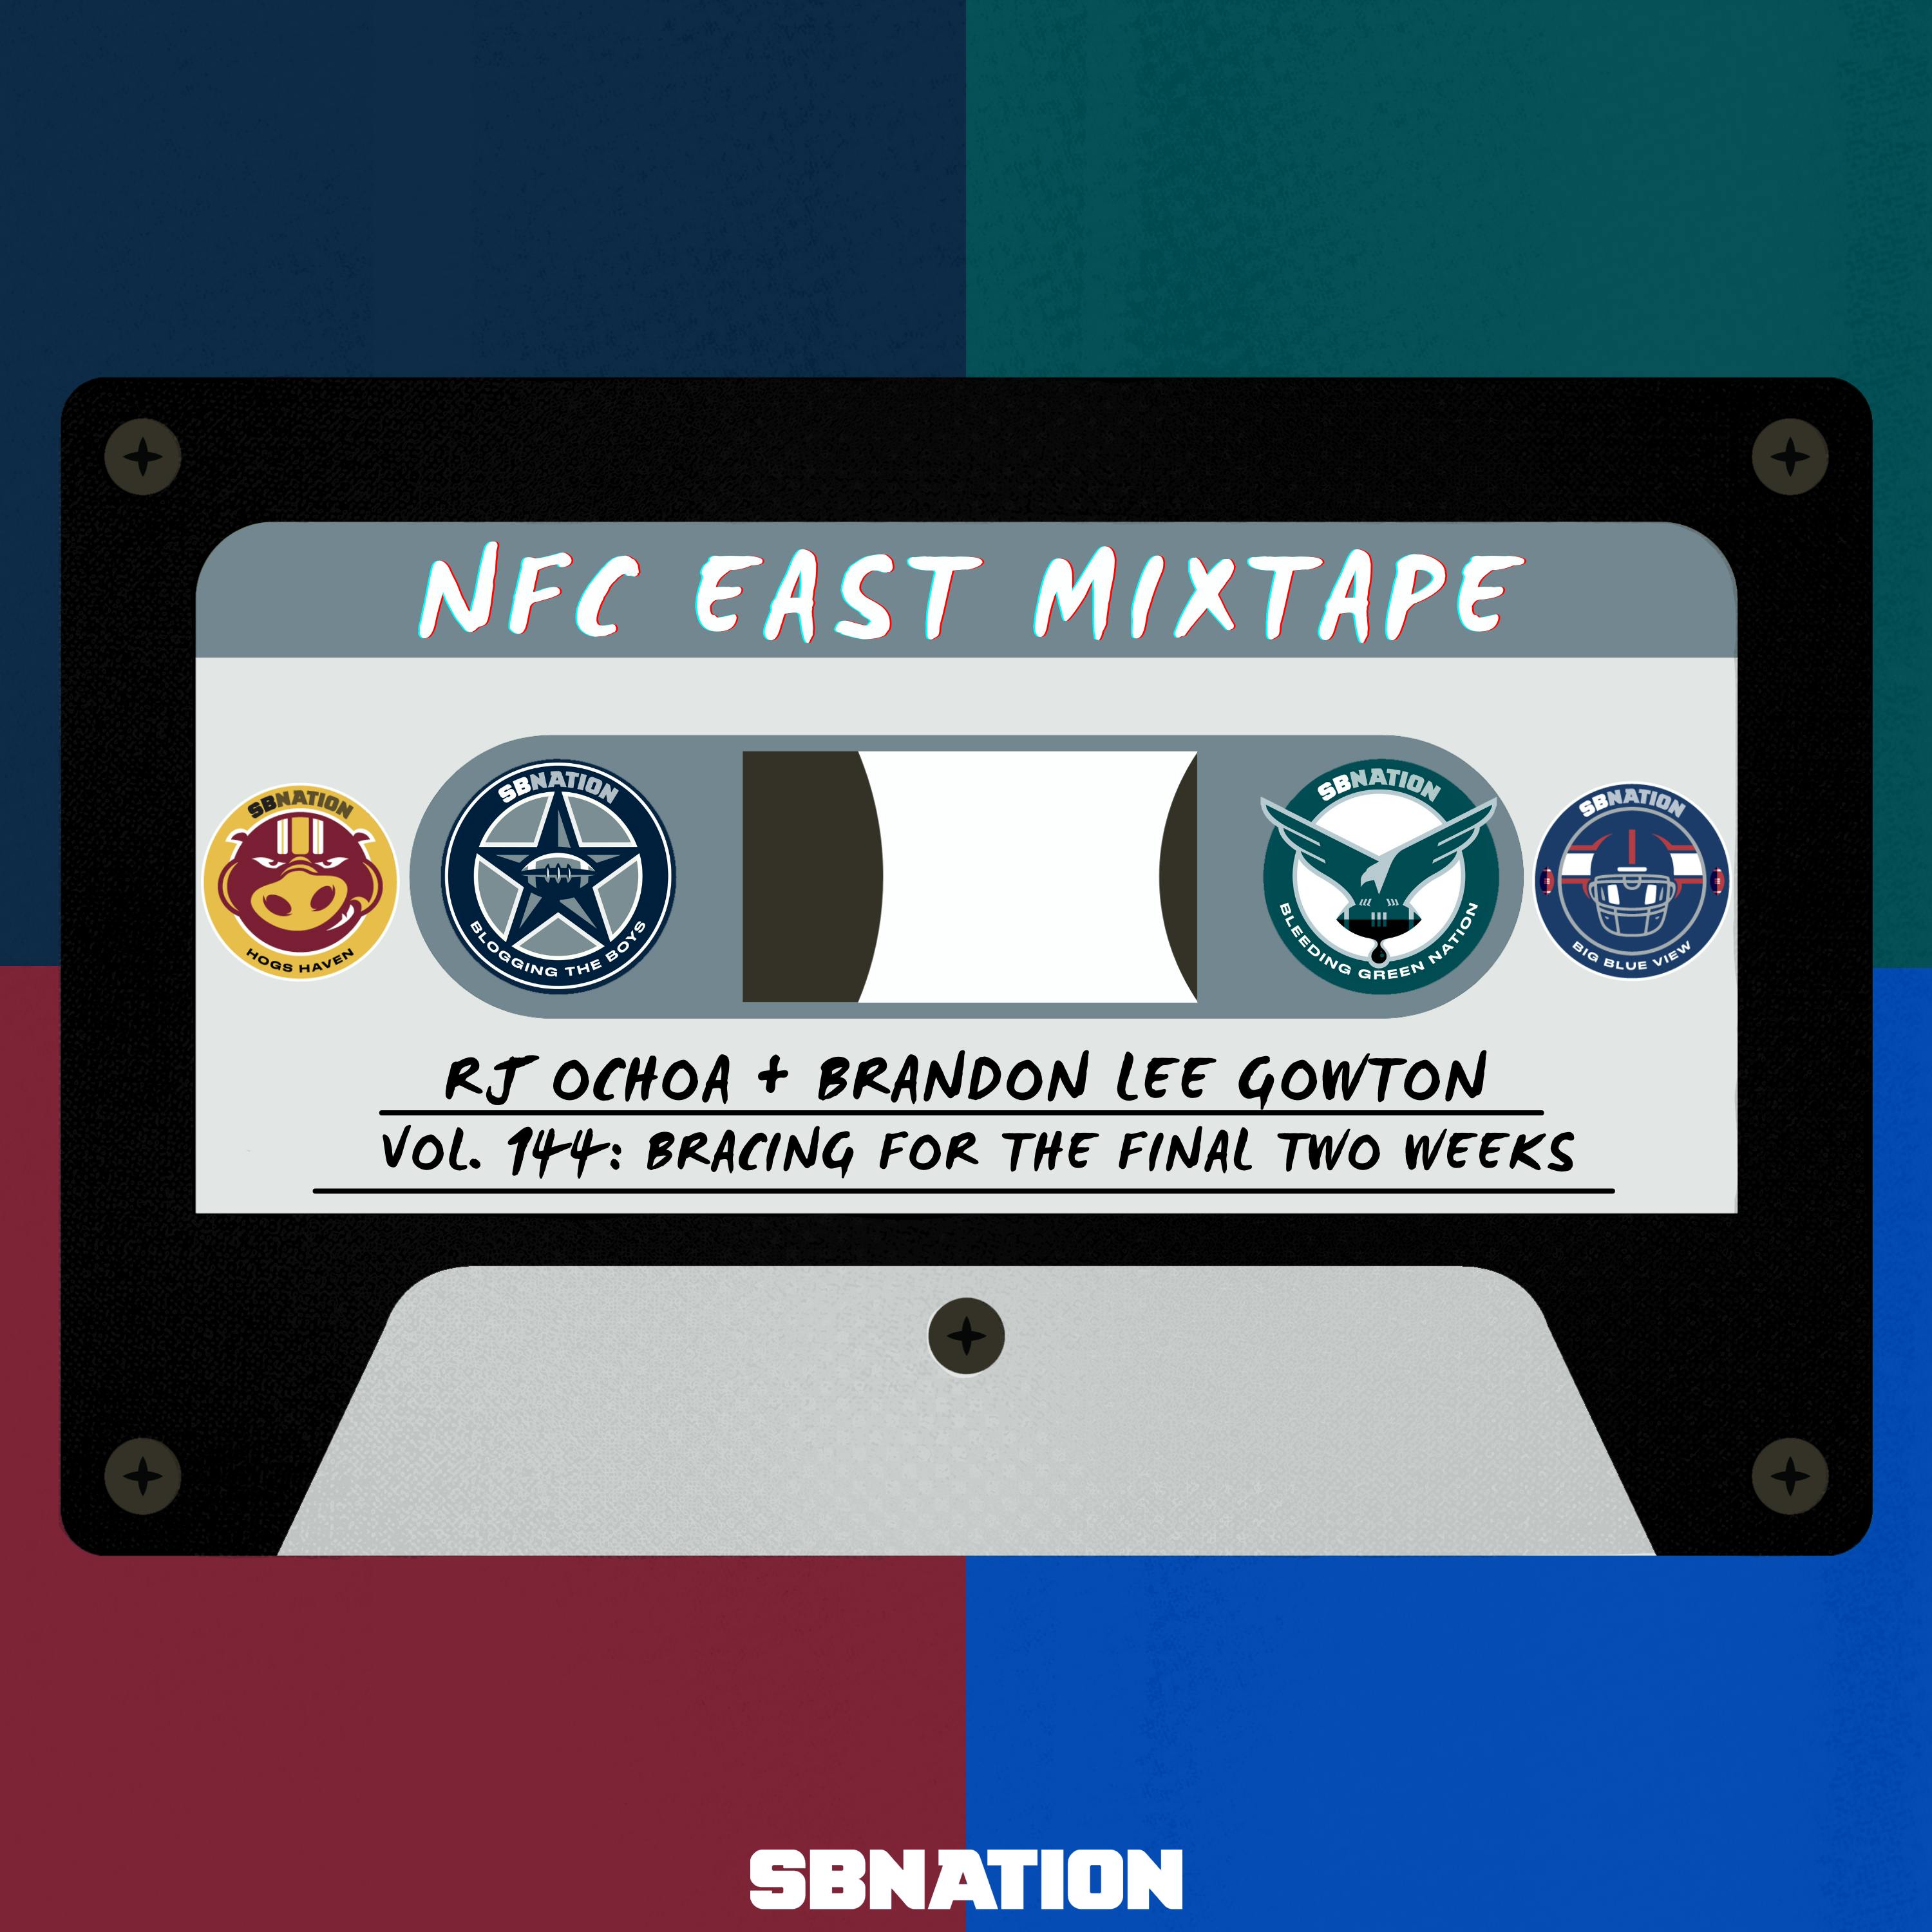 NFC East Mixtape Vol. 144: Bracing for the final two weeks